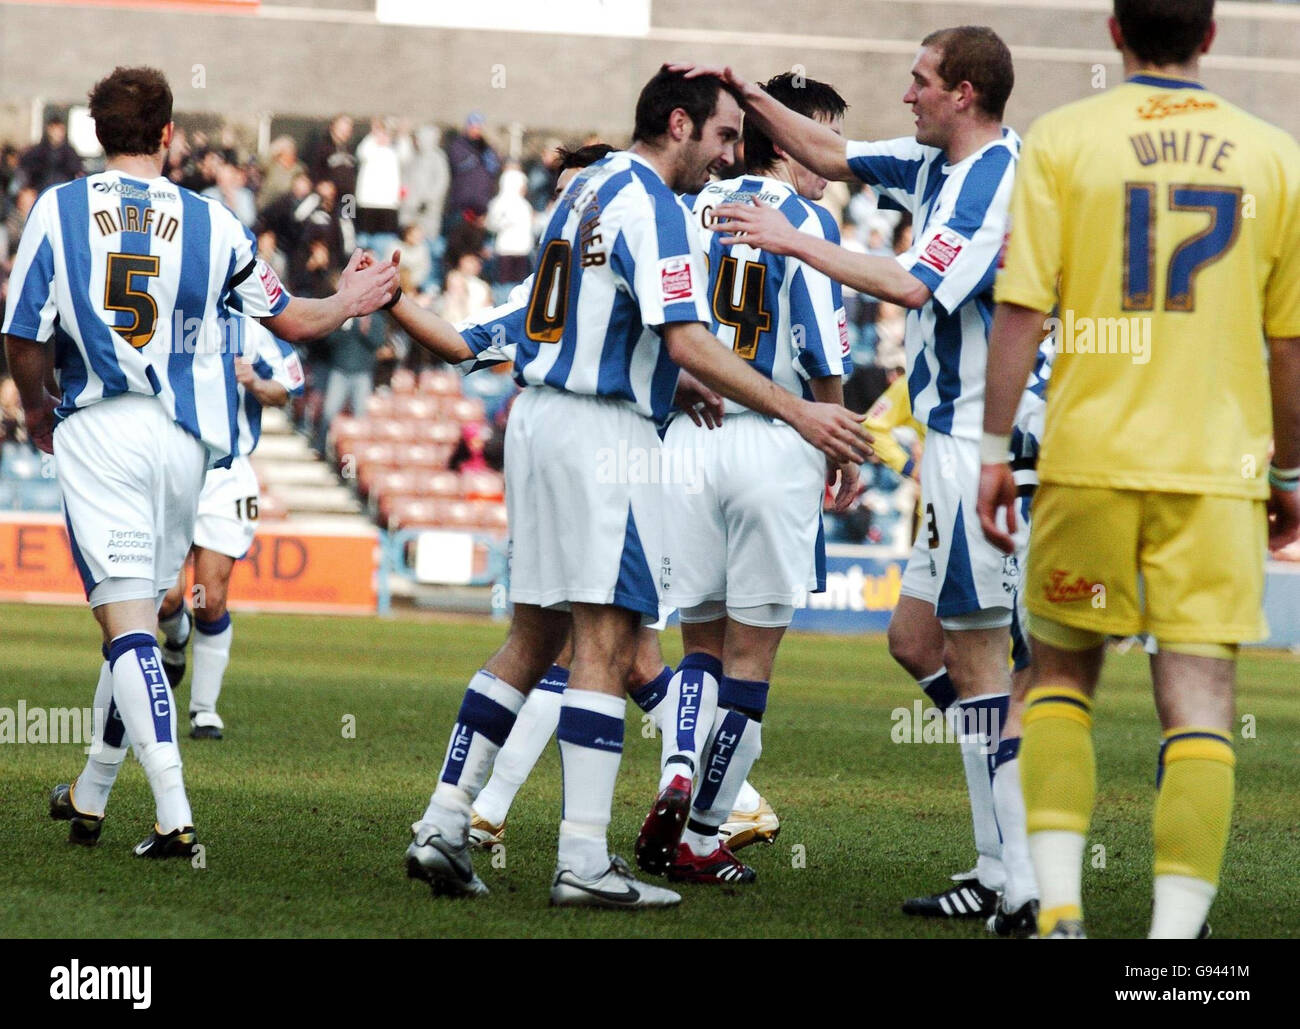 Huddersfield Town players celebrate after the first goal during the Coca-Cola League One match against Colchester at the Galpharm Stadium, Huddersfield, Saturday February 11, 2006. PRESS ASSOCIATION Photo. Photo credit should read: PA. NO UNOFFICIAL CLUB WEBSITE USE. Stock Photo